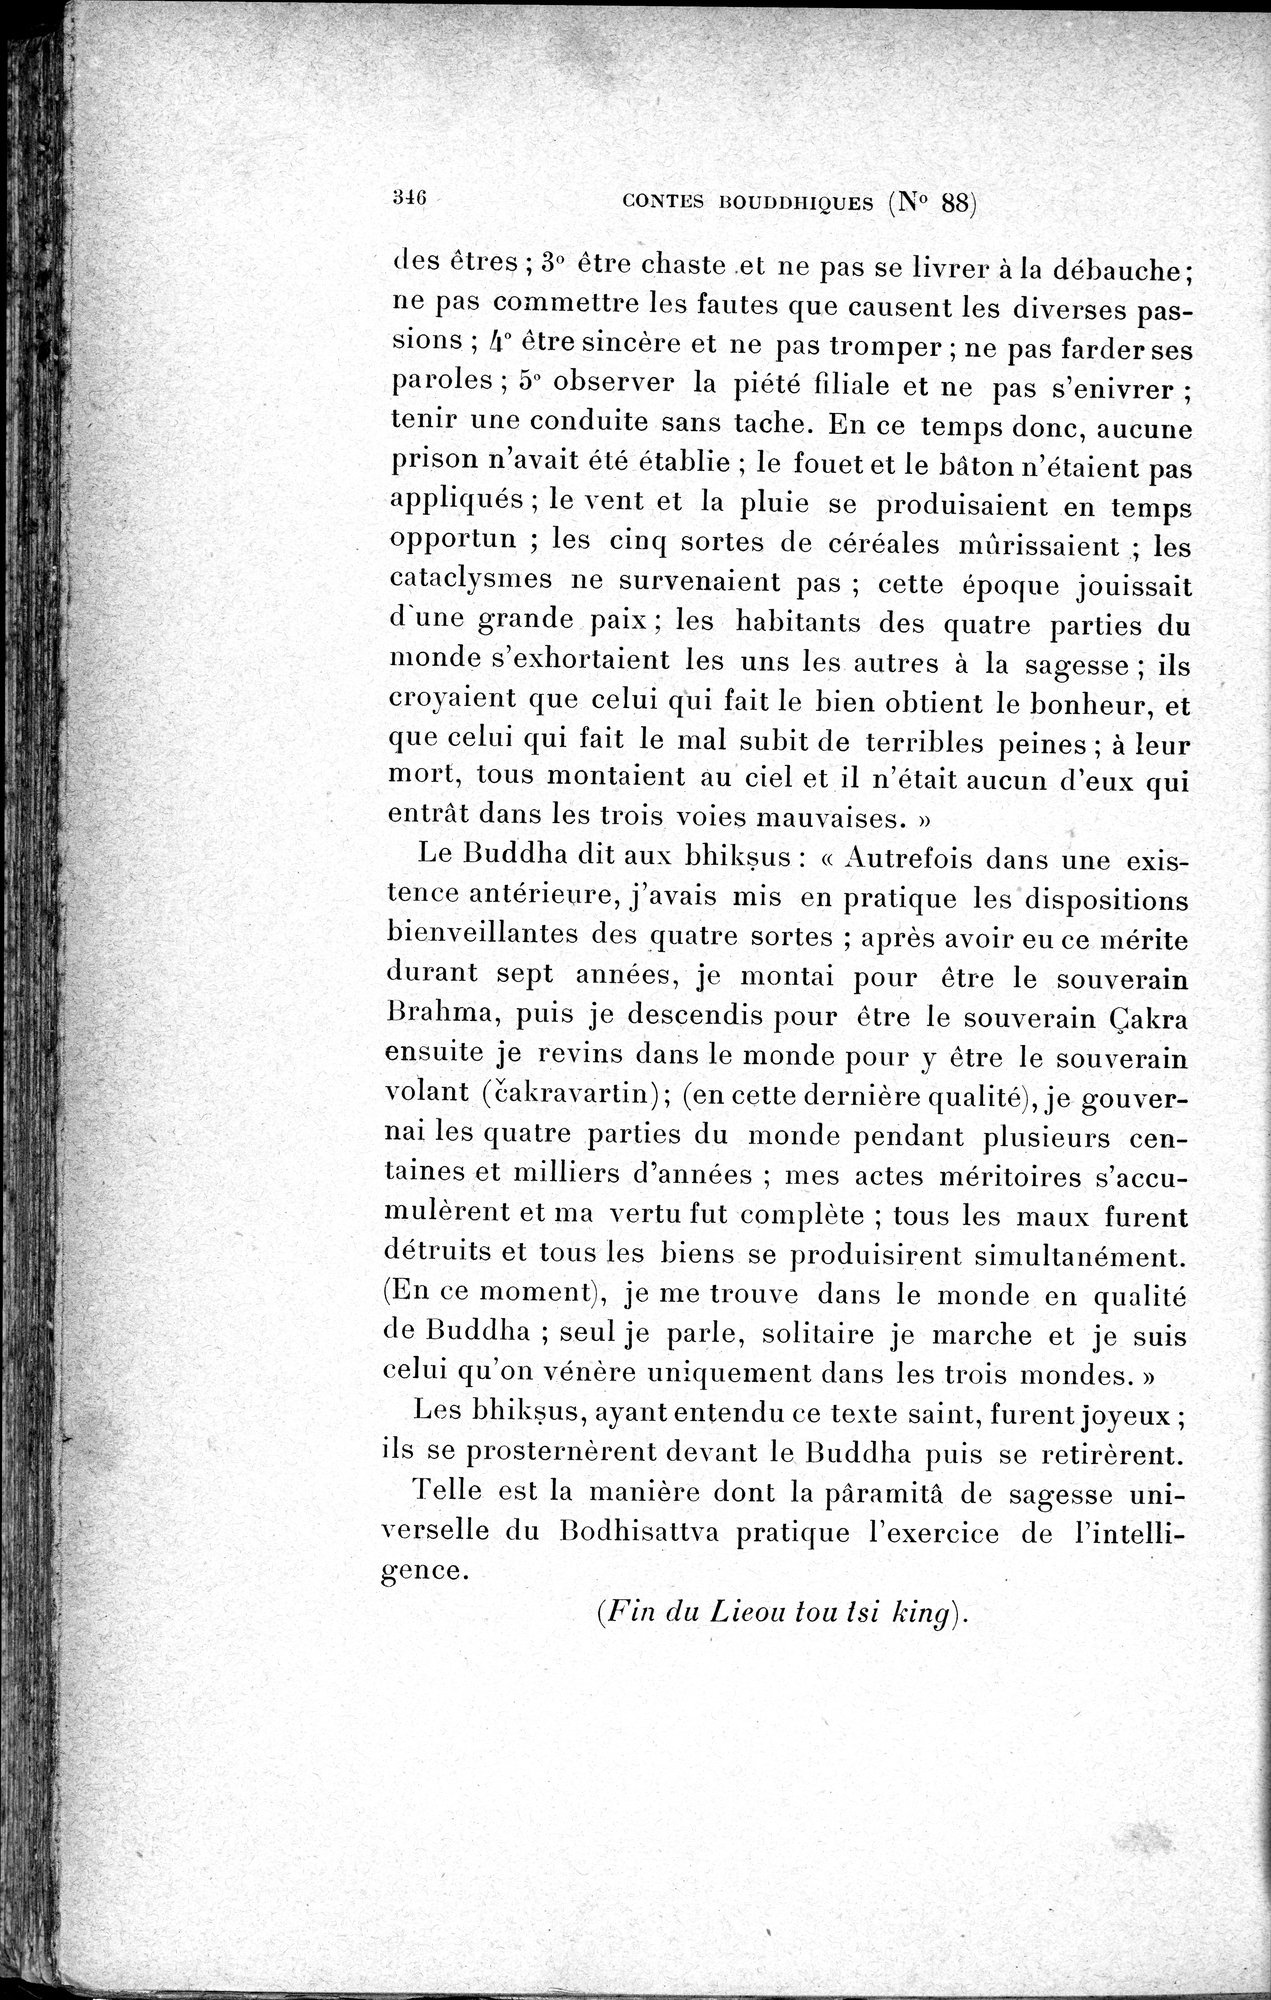 Cinq Cents Contes et Apologues : vol.1 / Page 380 (Grayscale High Resolution Image)